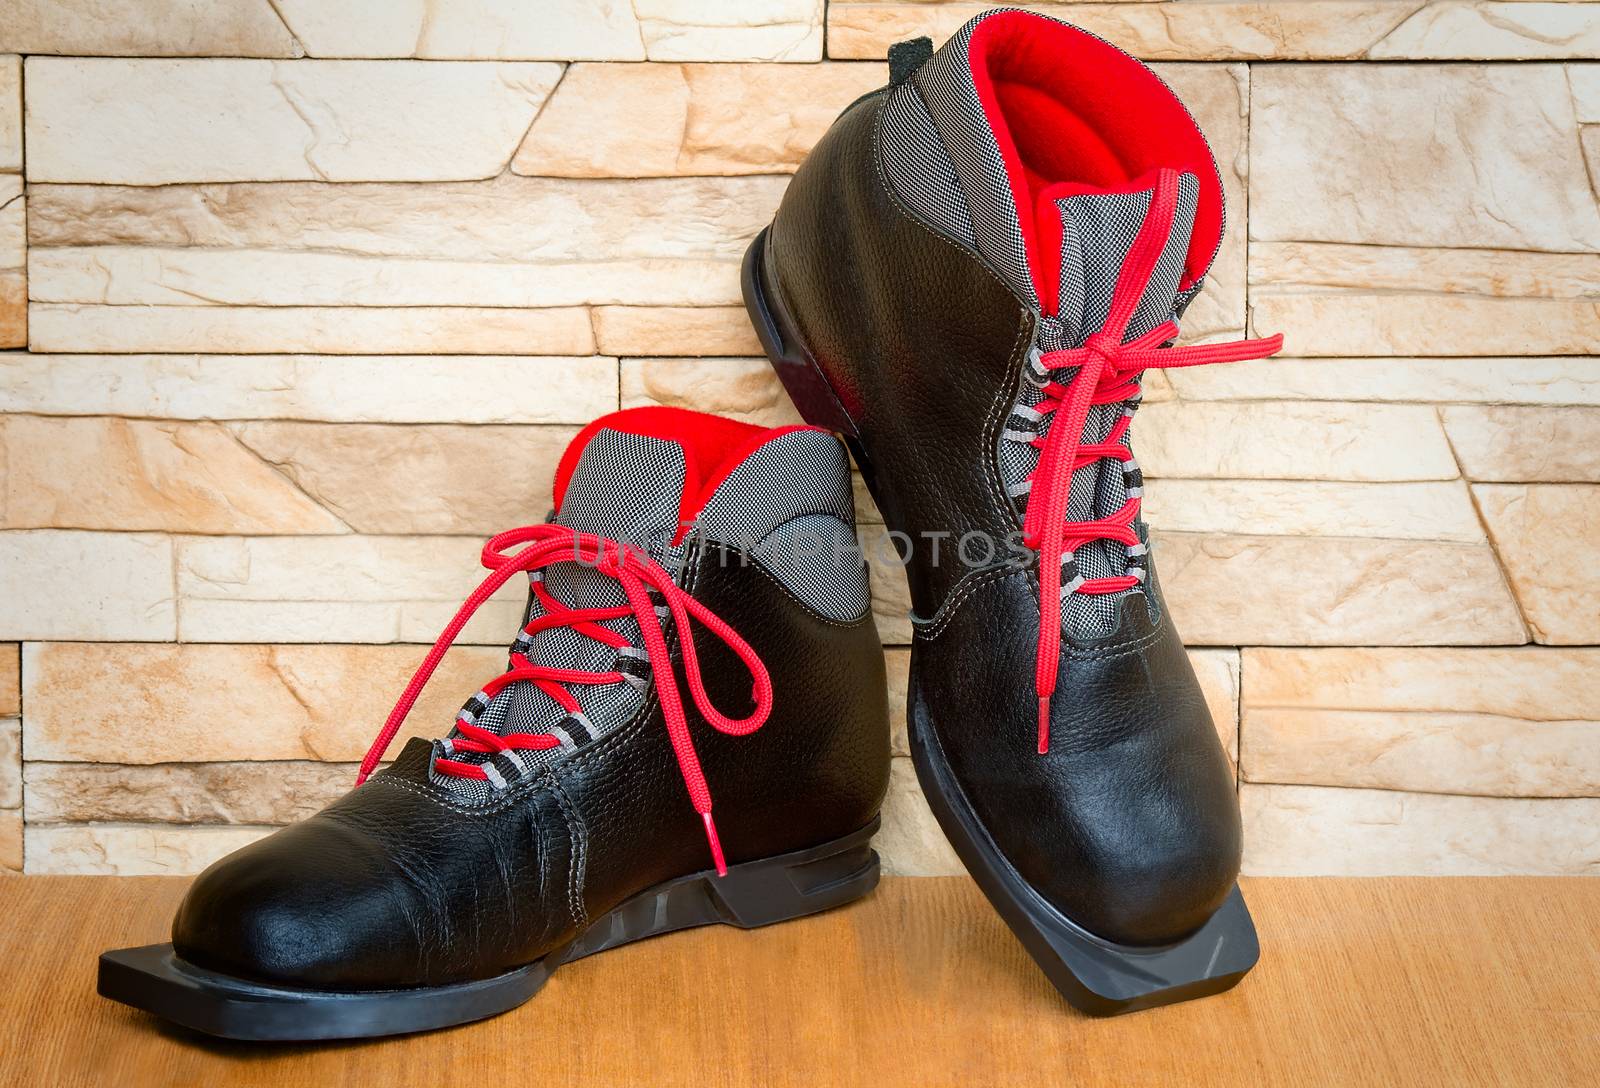 Black boots with red finishing for skiing.